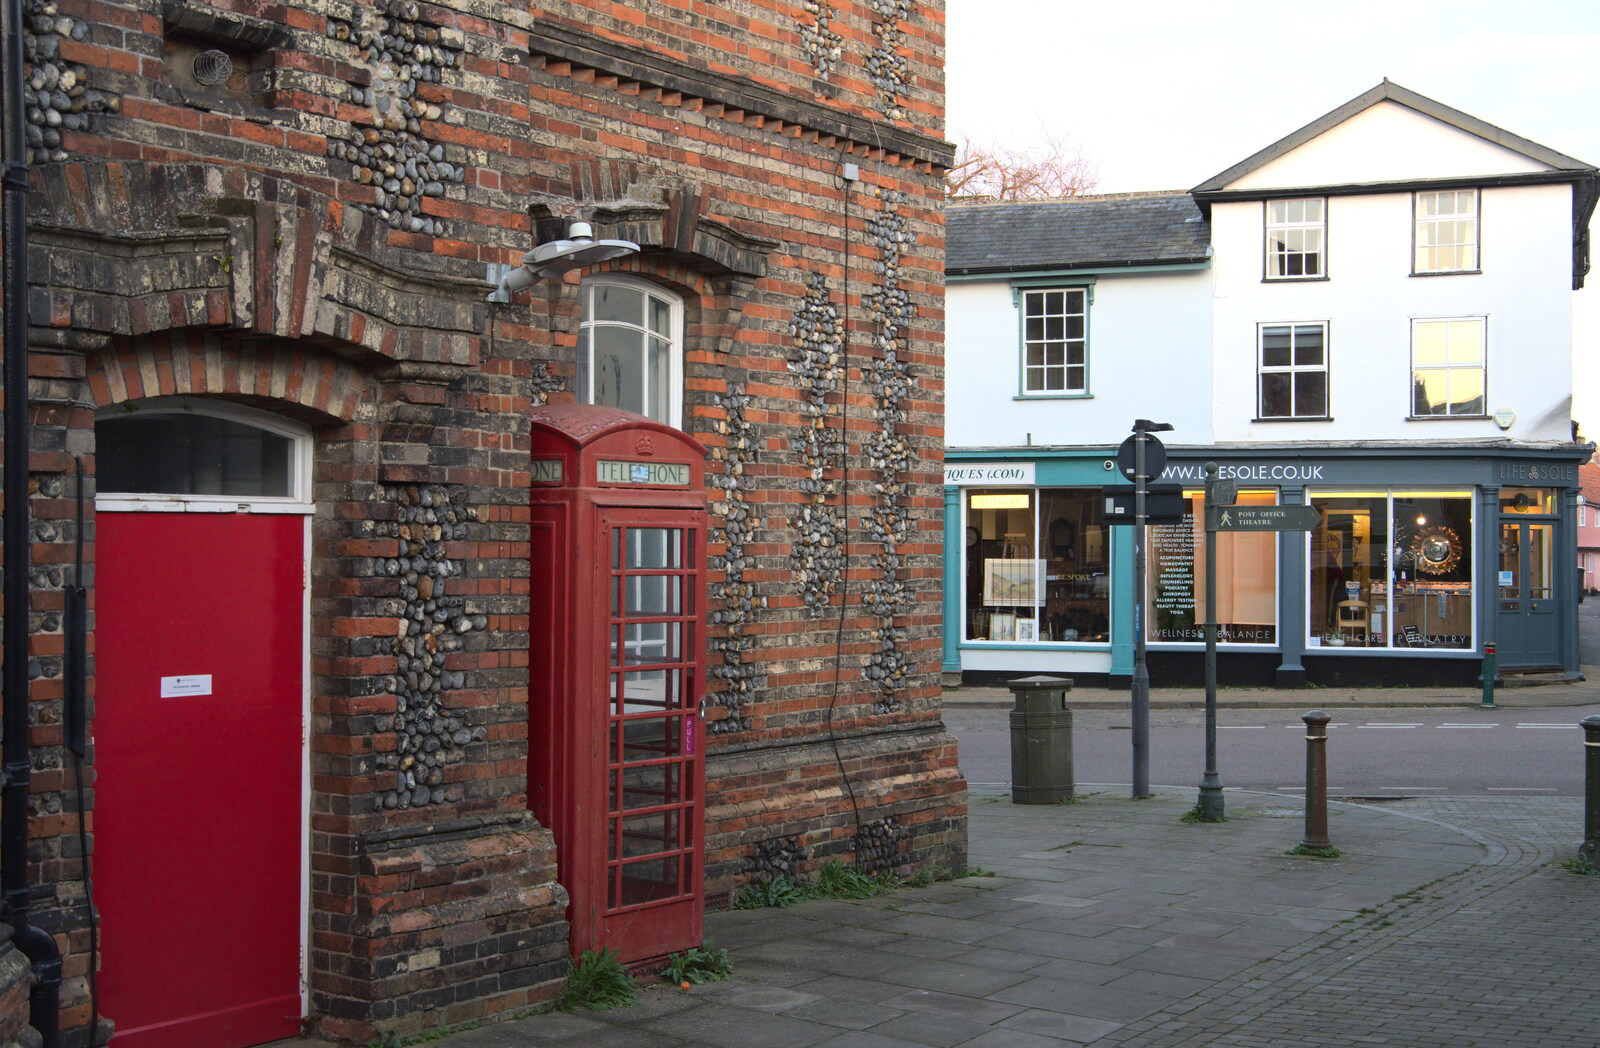 A K6 phone box hides away outside the Town Hall from The Dereliction of Eye, Suffolk - 22nd November 2020